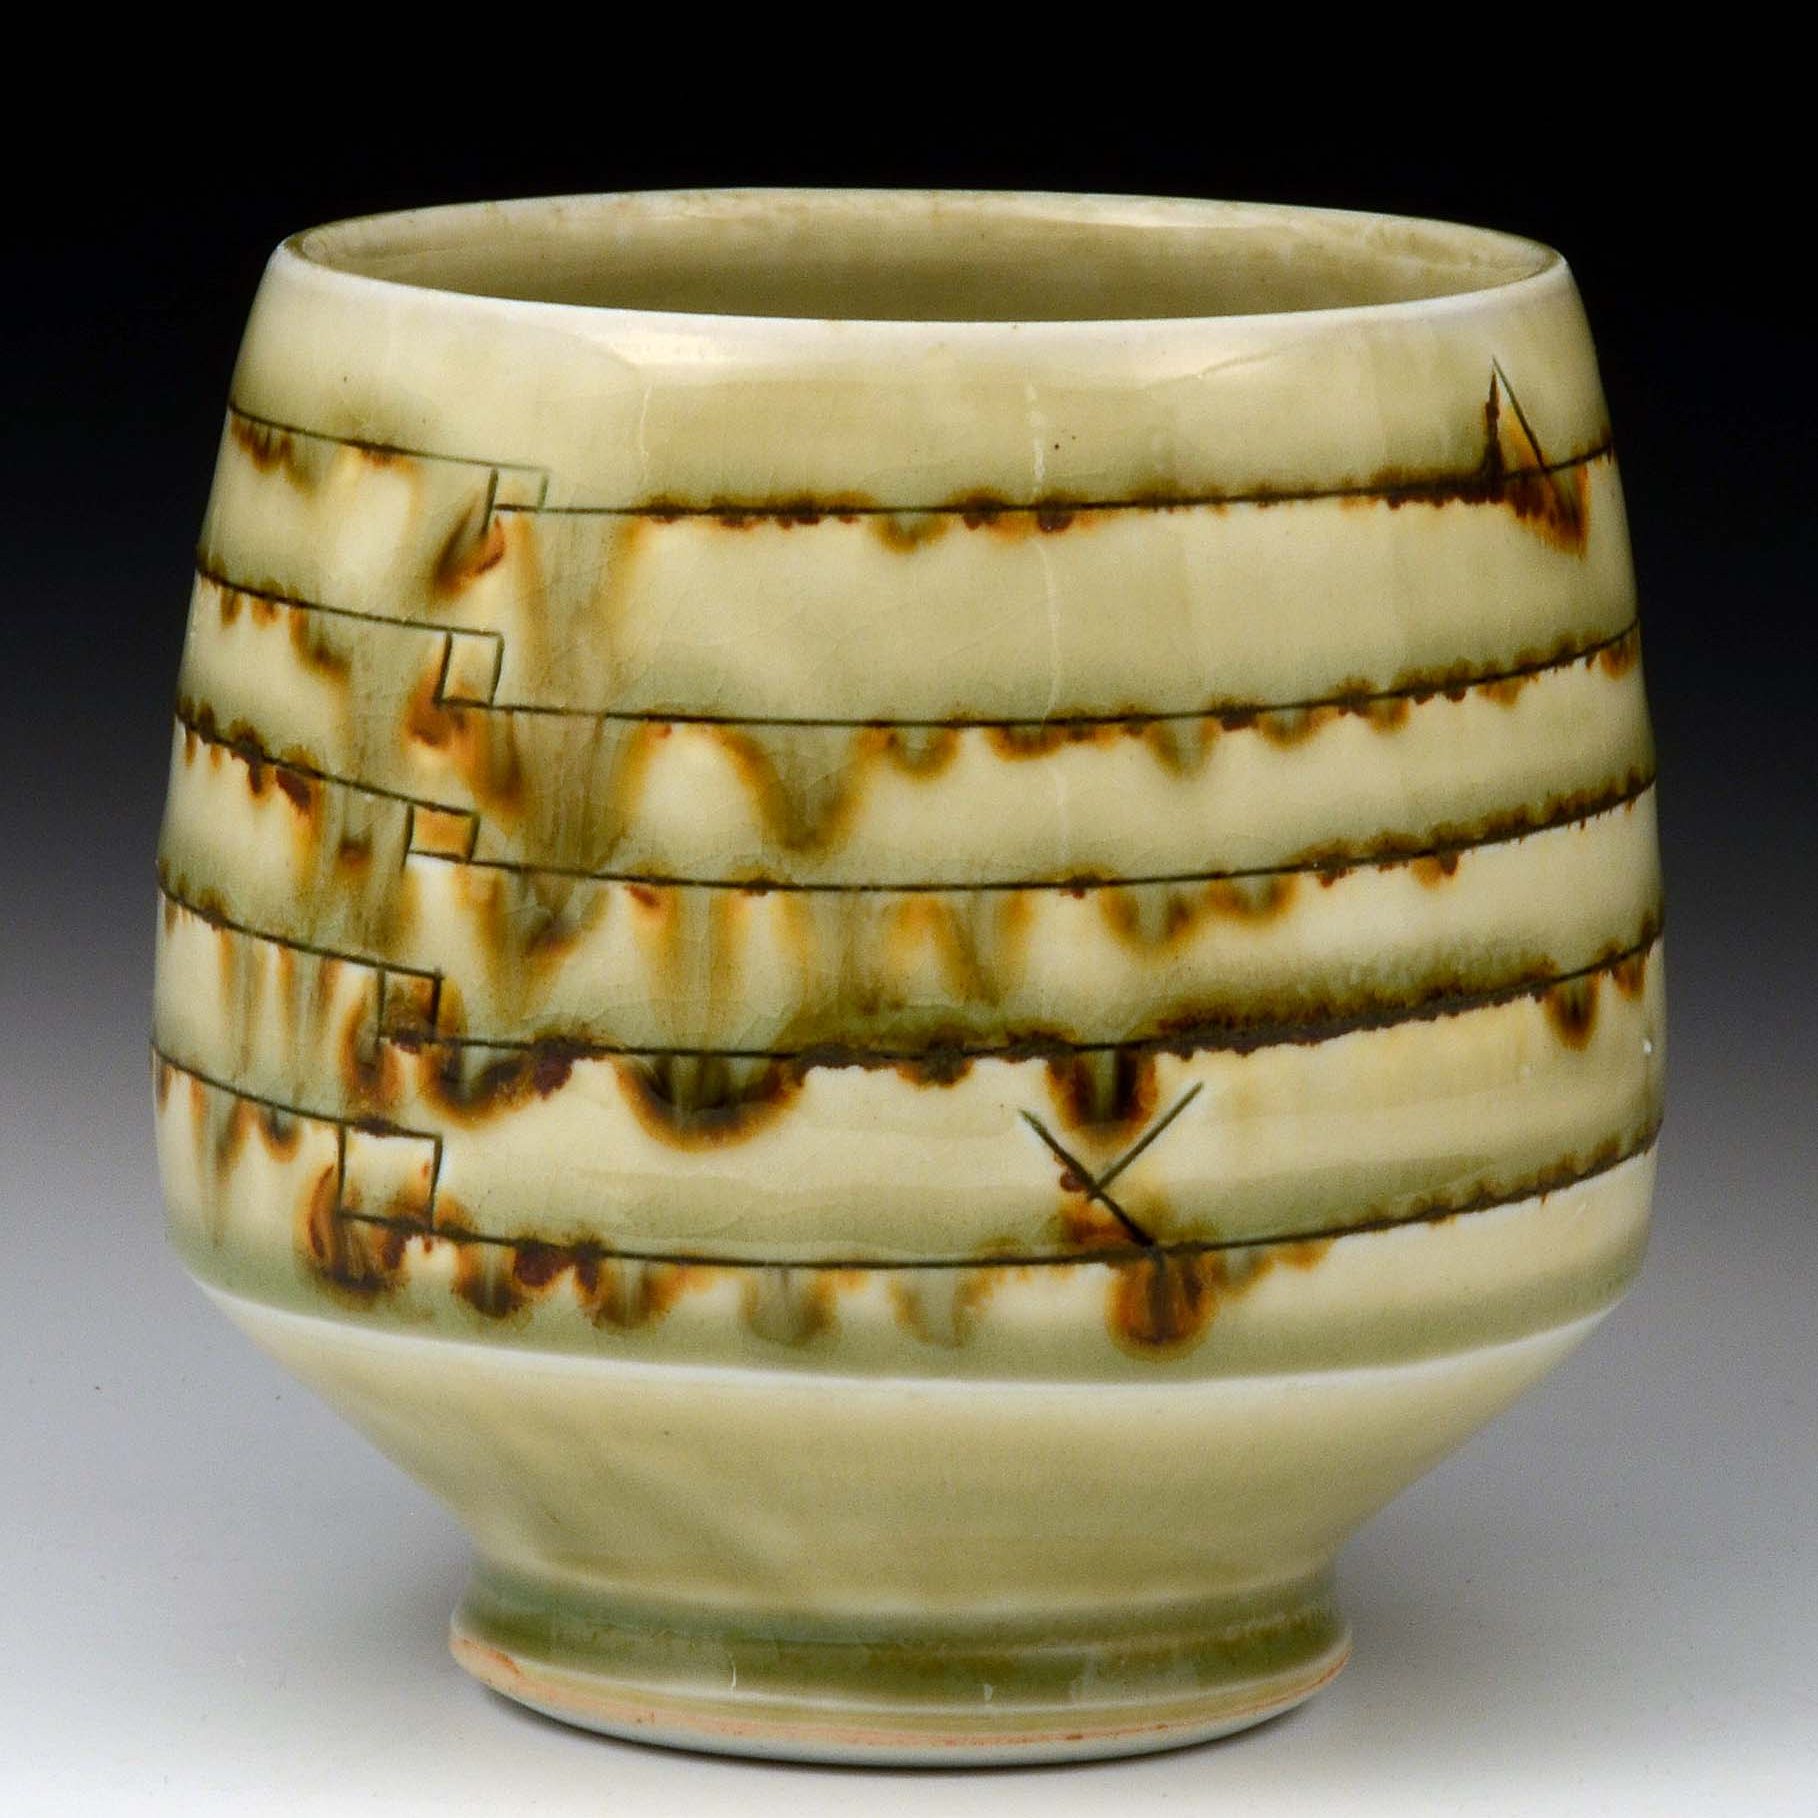 [5]
Rick Hintze, Yunomi, 2020, porcelain, iron stain, and wood ash glaze, 3.75x3.875x3.875 inches, collection of the artist